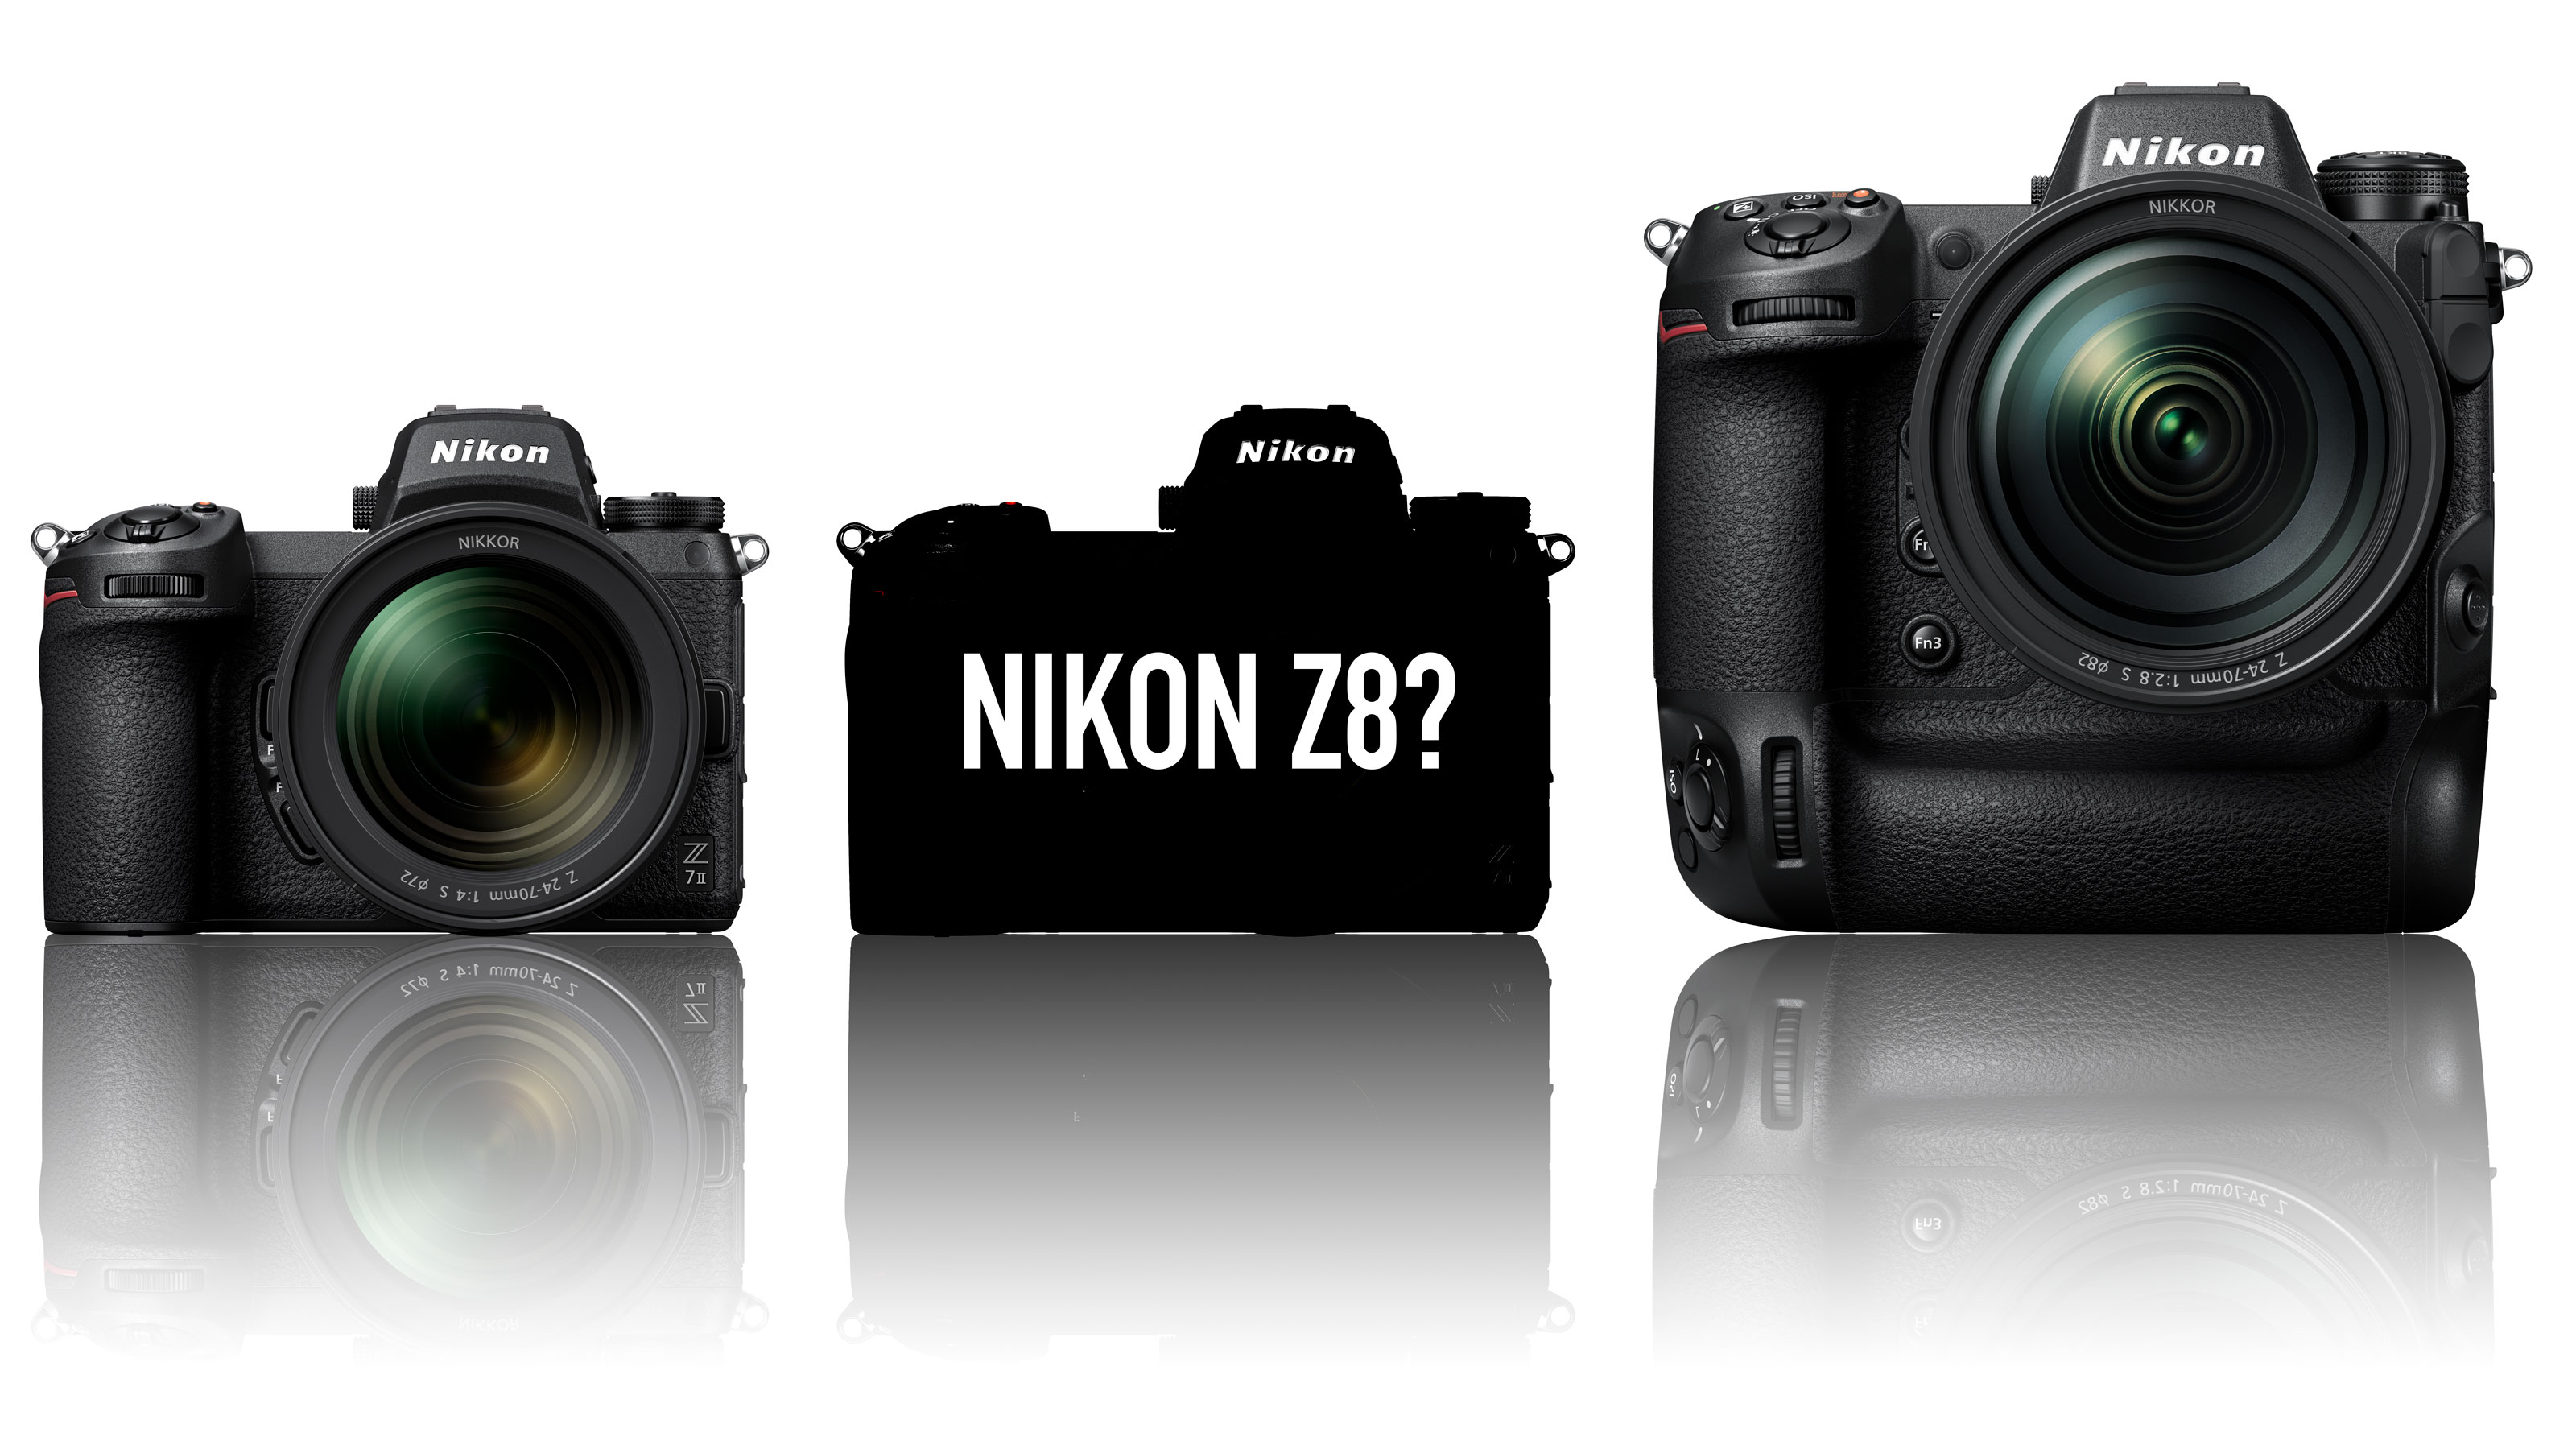 Andes Massage shield Nikon Z8 rumors: is it actually real? What do we think we know? | Digital  Camera World